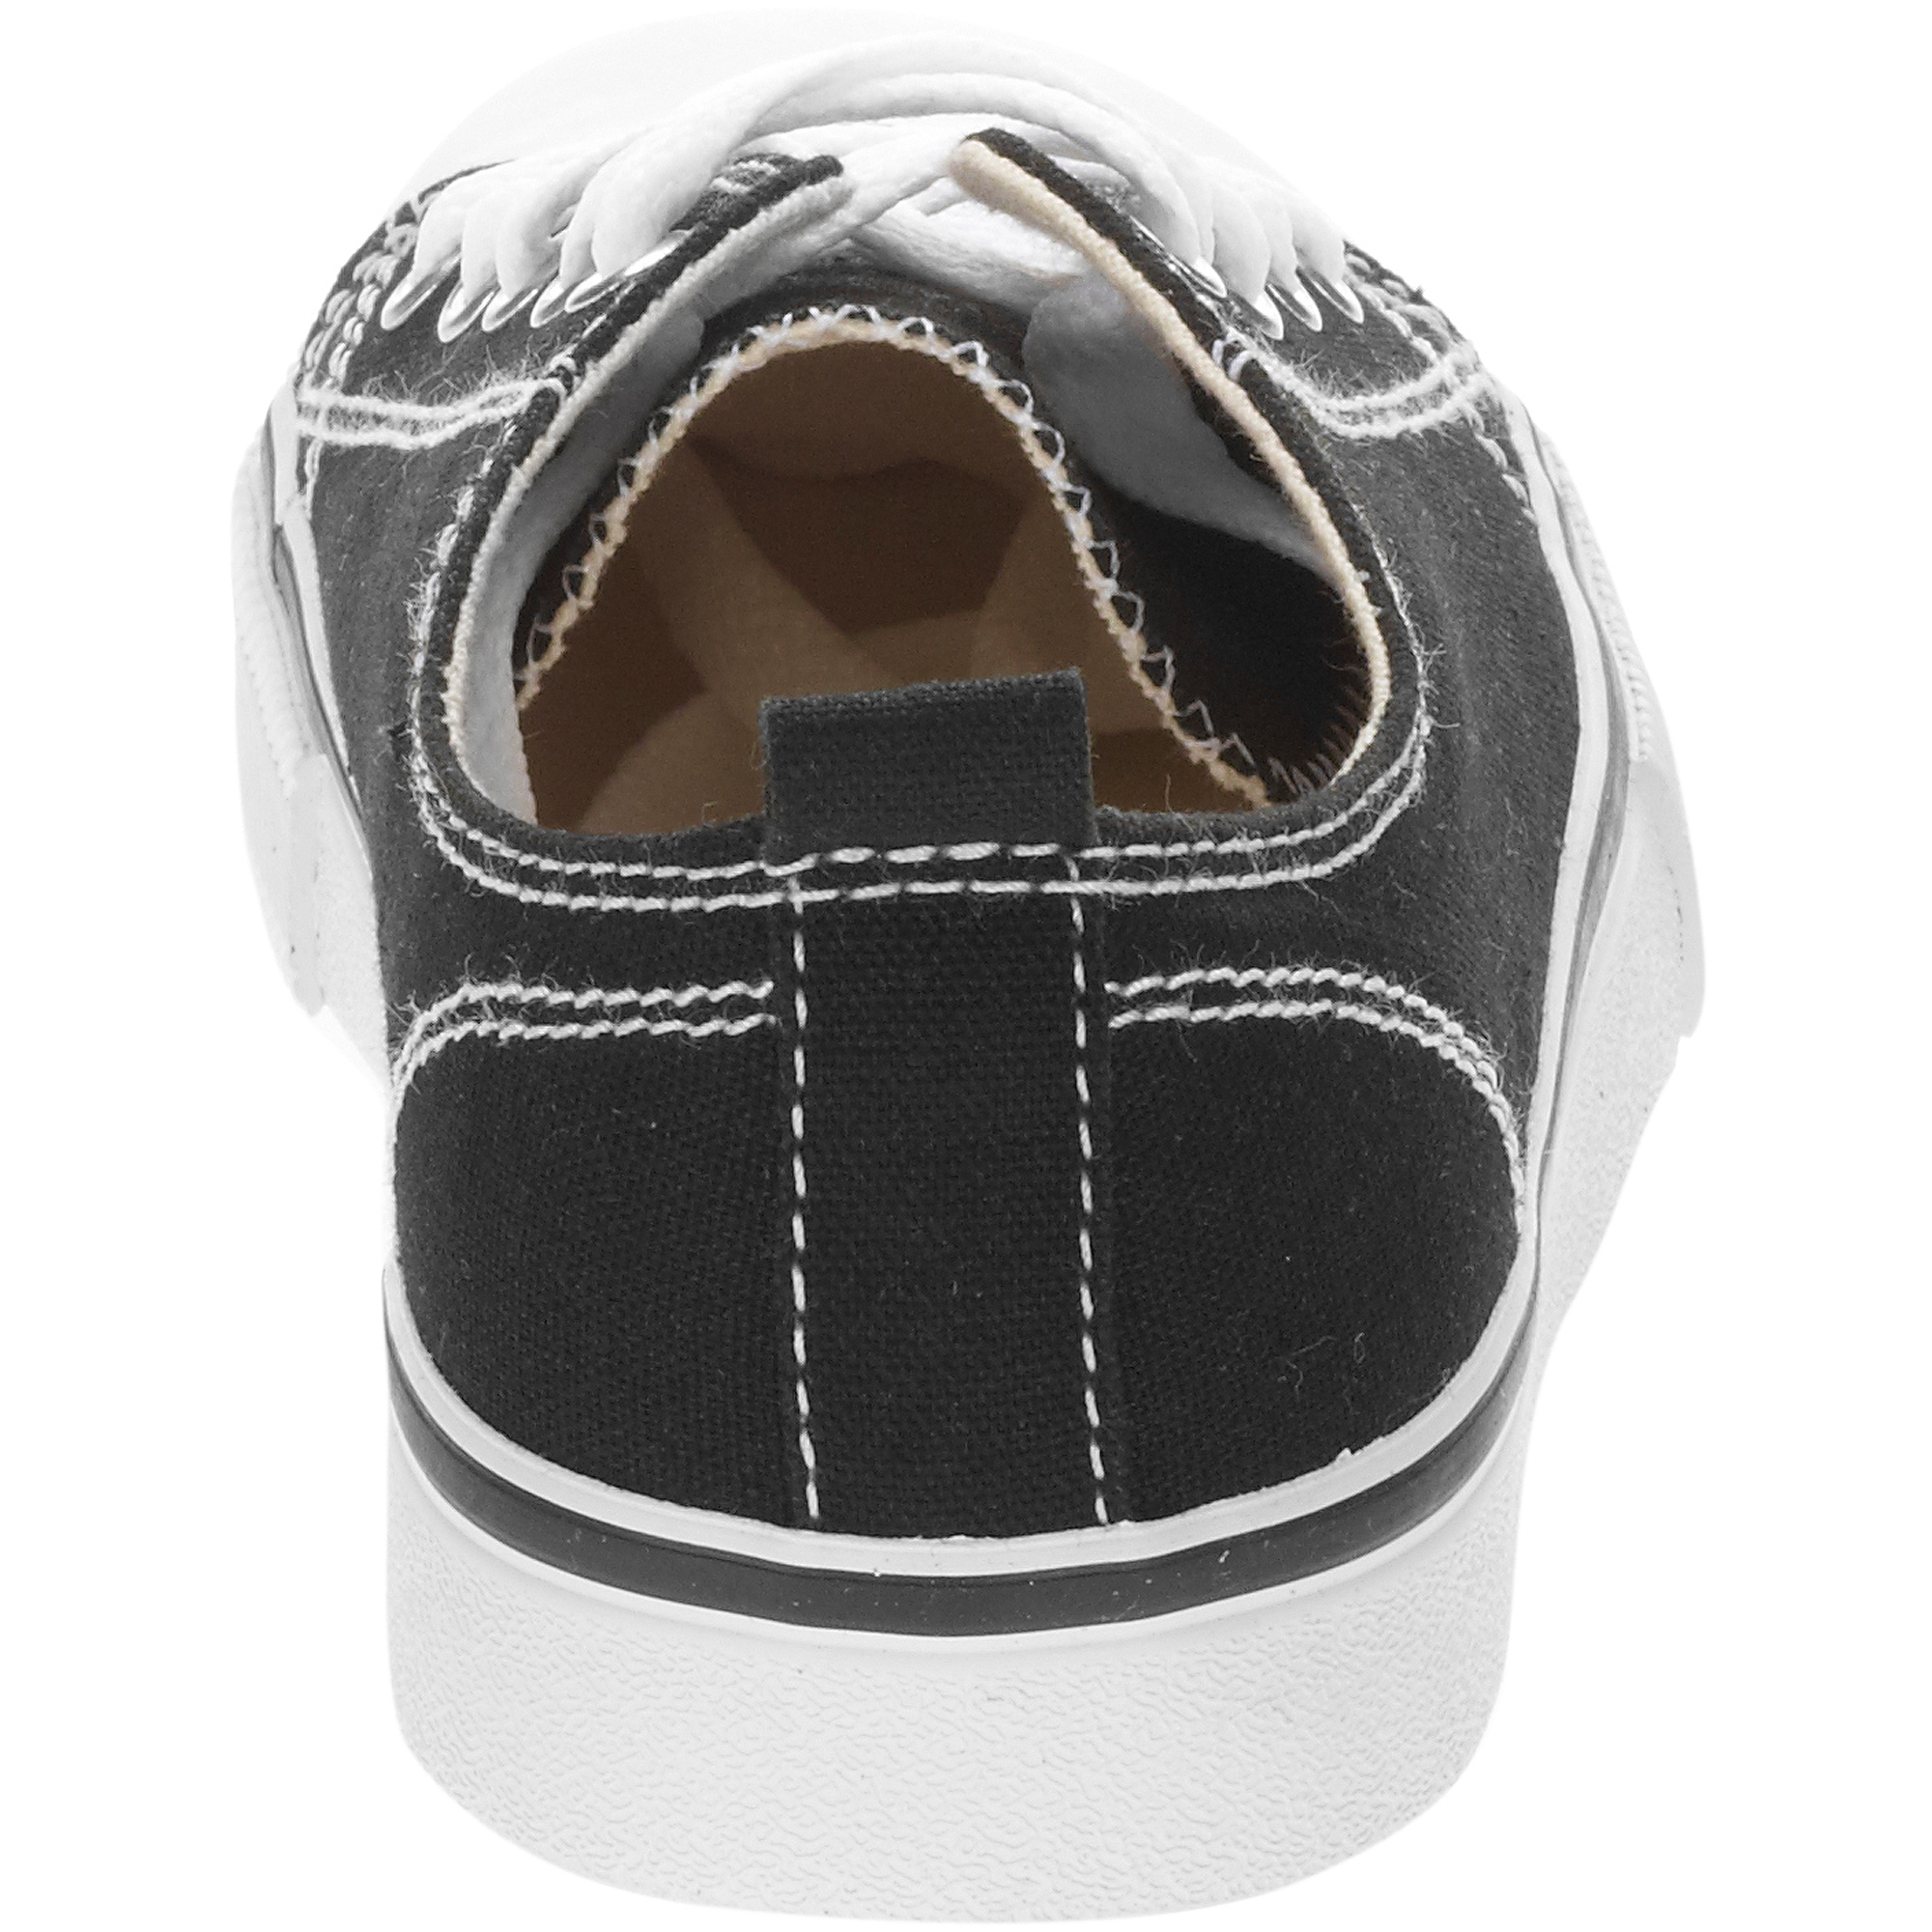 BOY'S CAPTOP LACE-UP SNEAKER - image 4 of 5